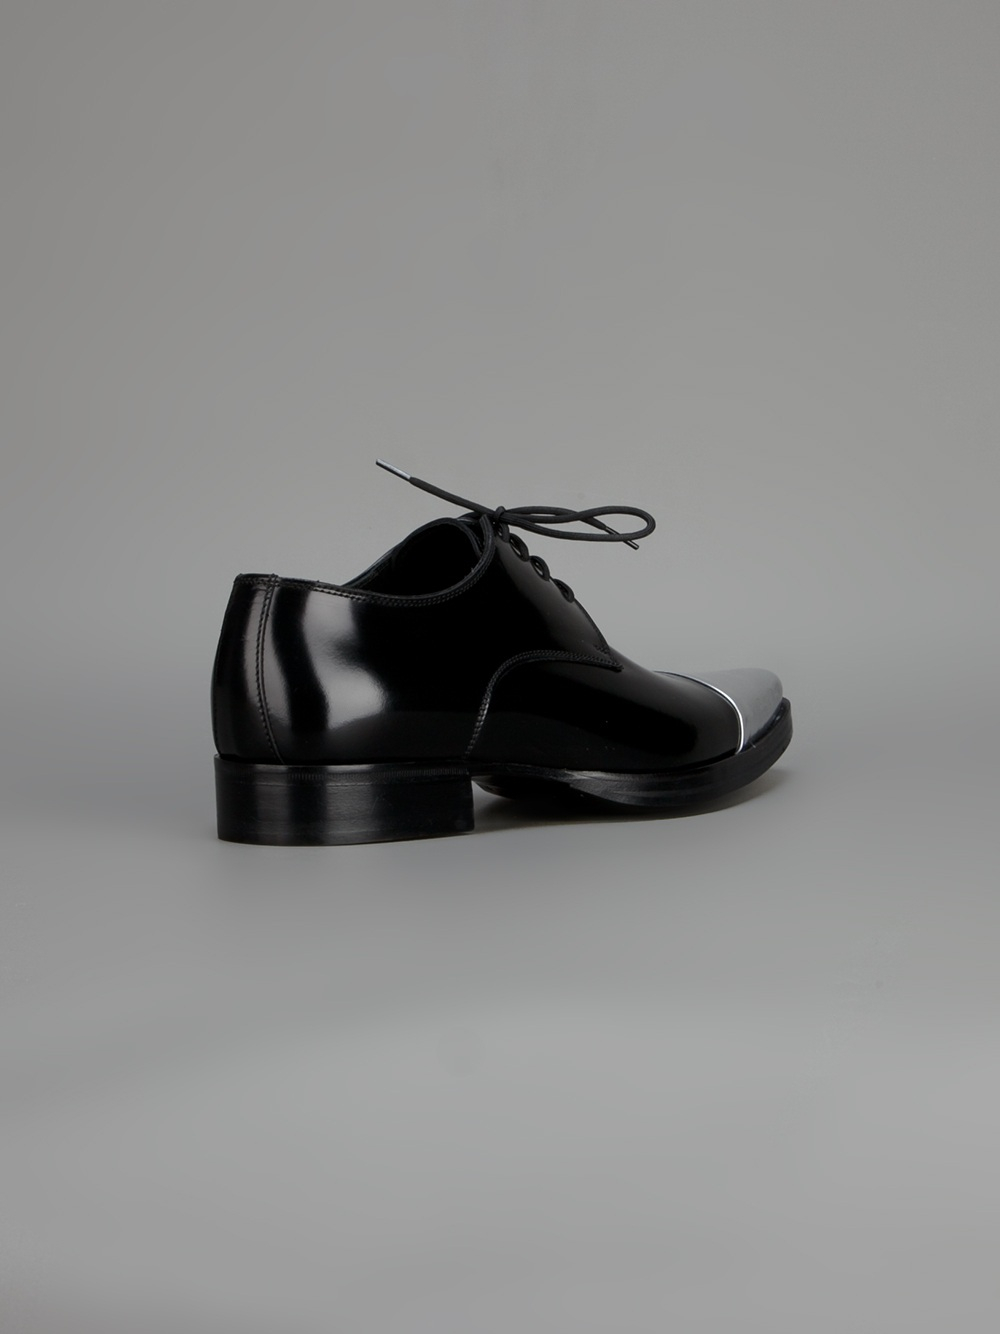 Lyst - Dsquared² Laceup Shoe in Black for Men